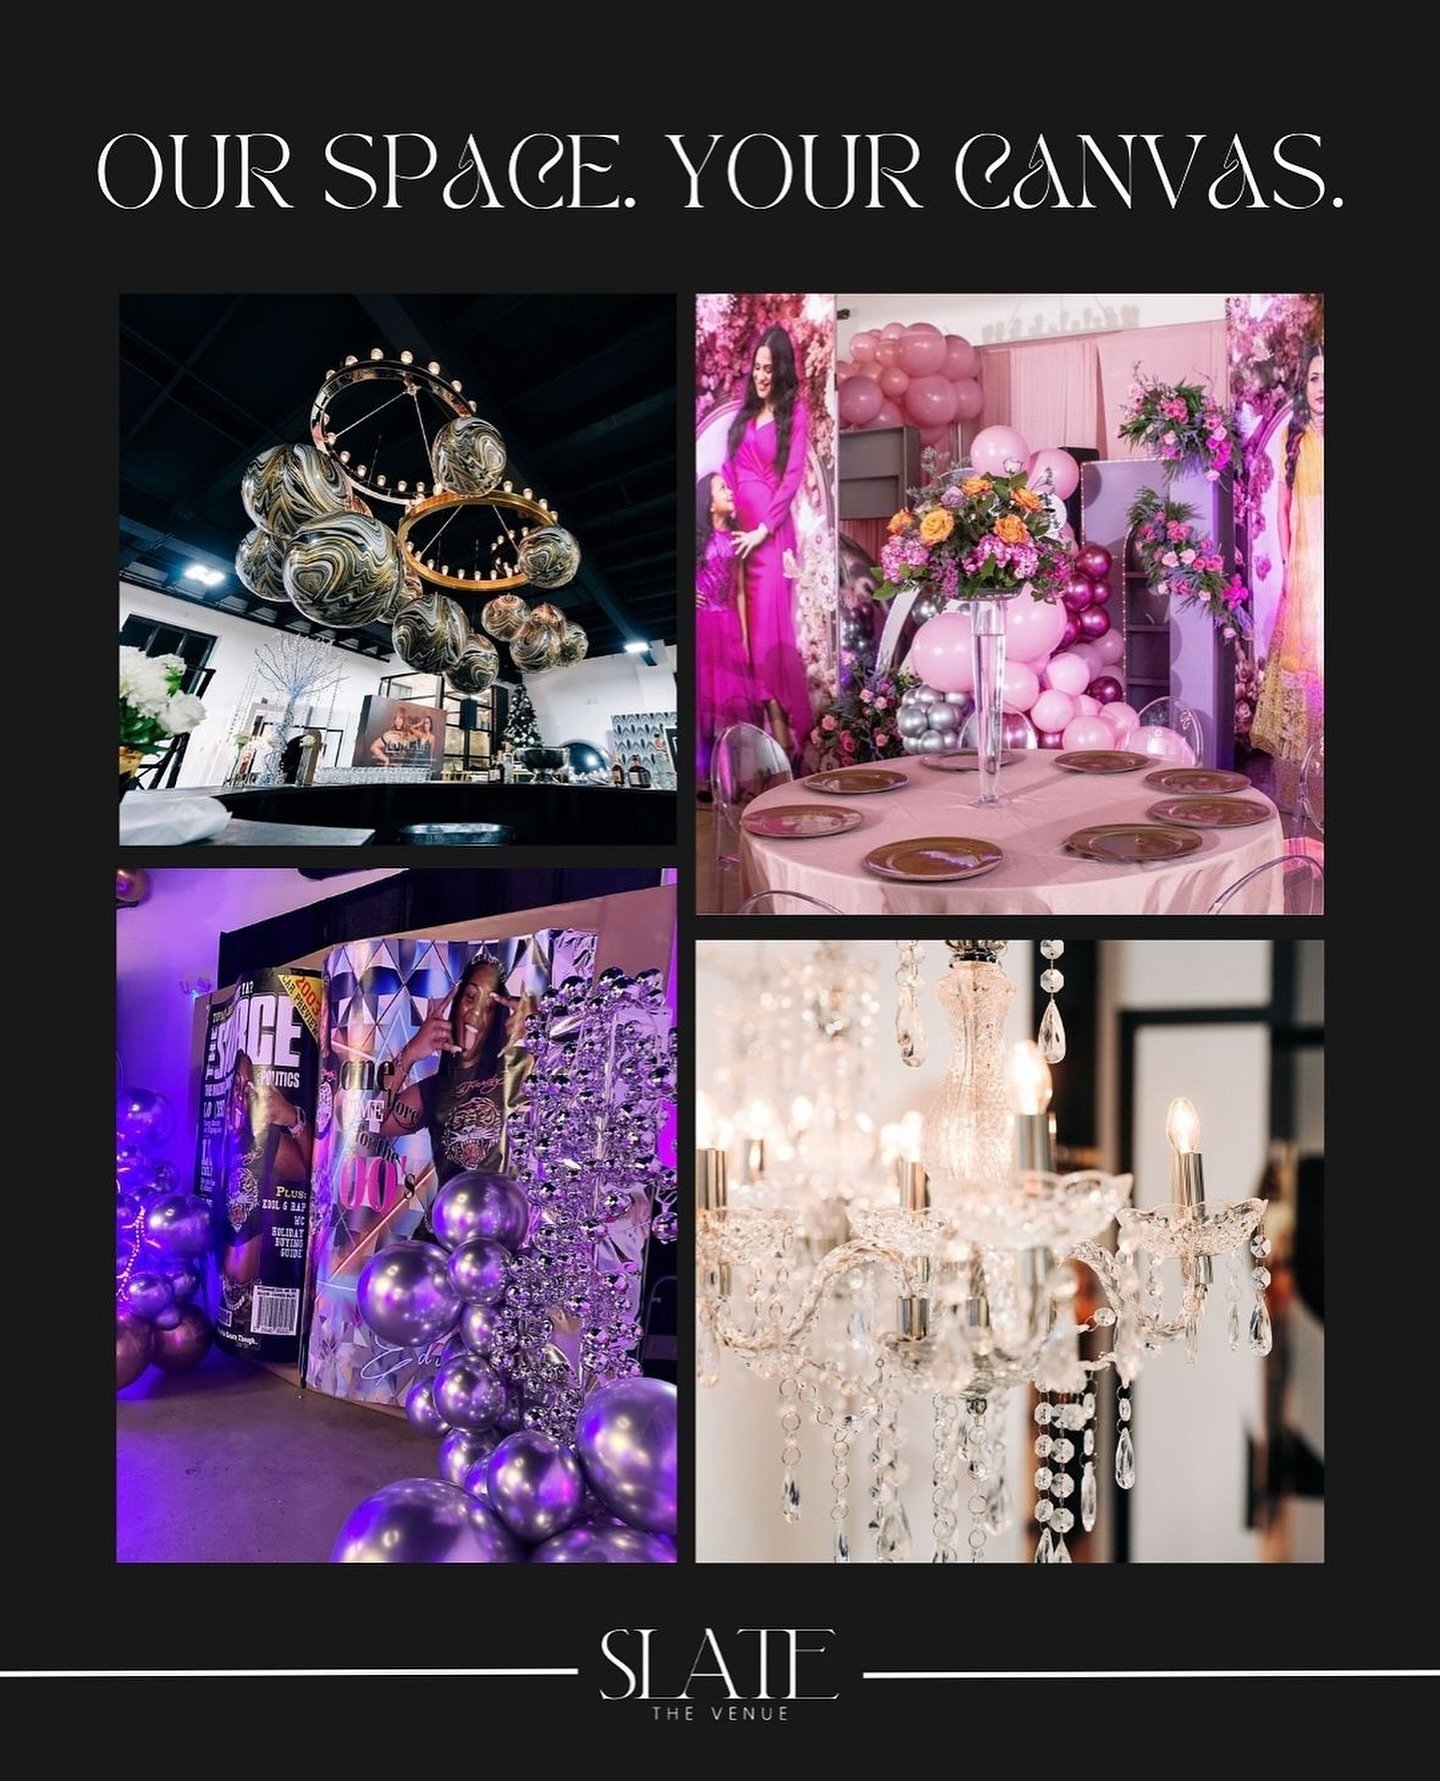 Discover Slate The Venue for your next event or celebration! We are the experts in making your event dreams come true. Tell us your idea and we&rsquo;ll figure out how to make it happen. Learn more today at www.slatethevenue.com! 🥂✨